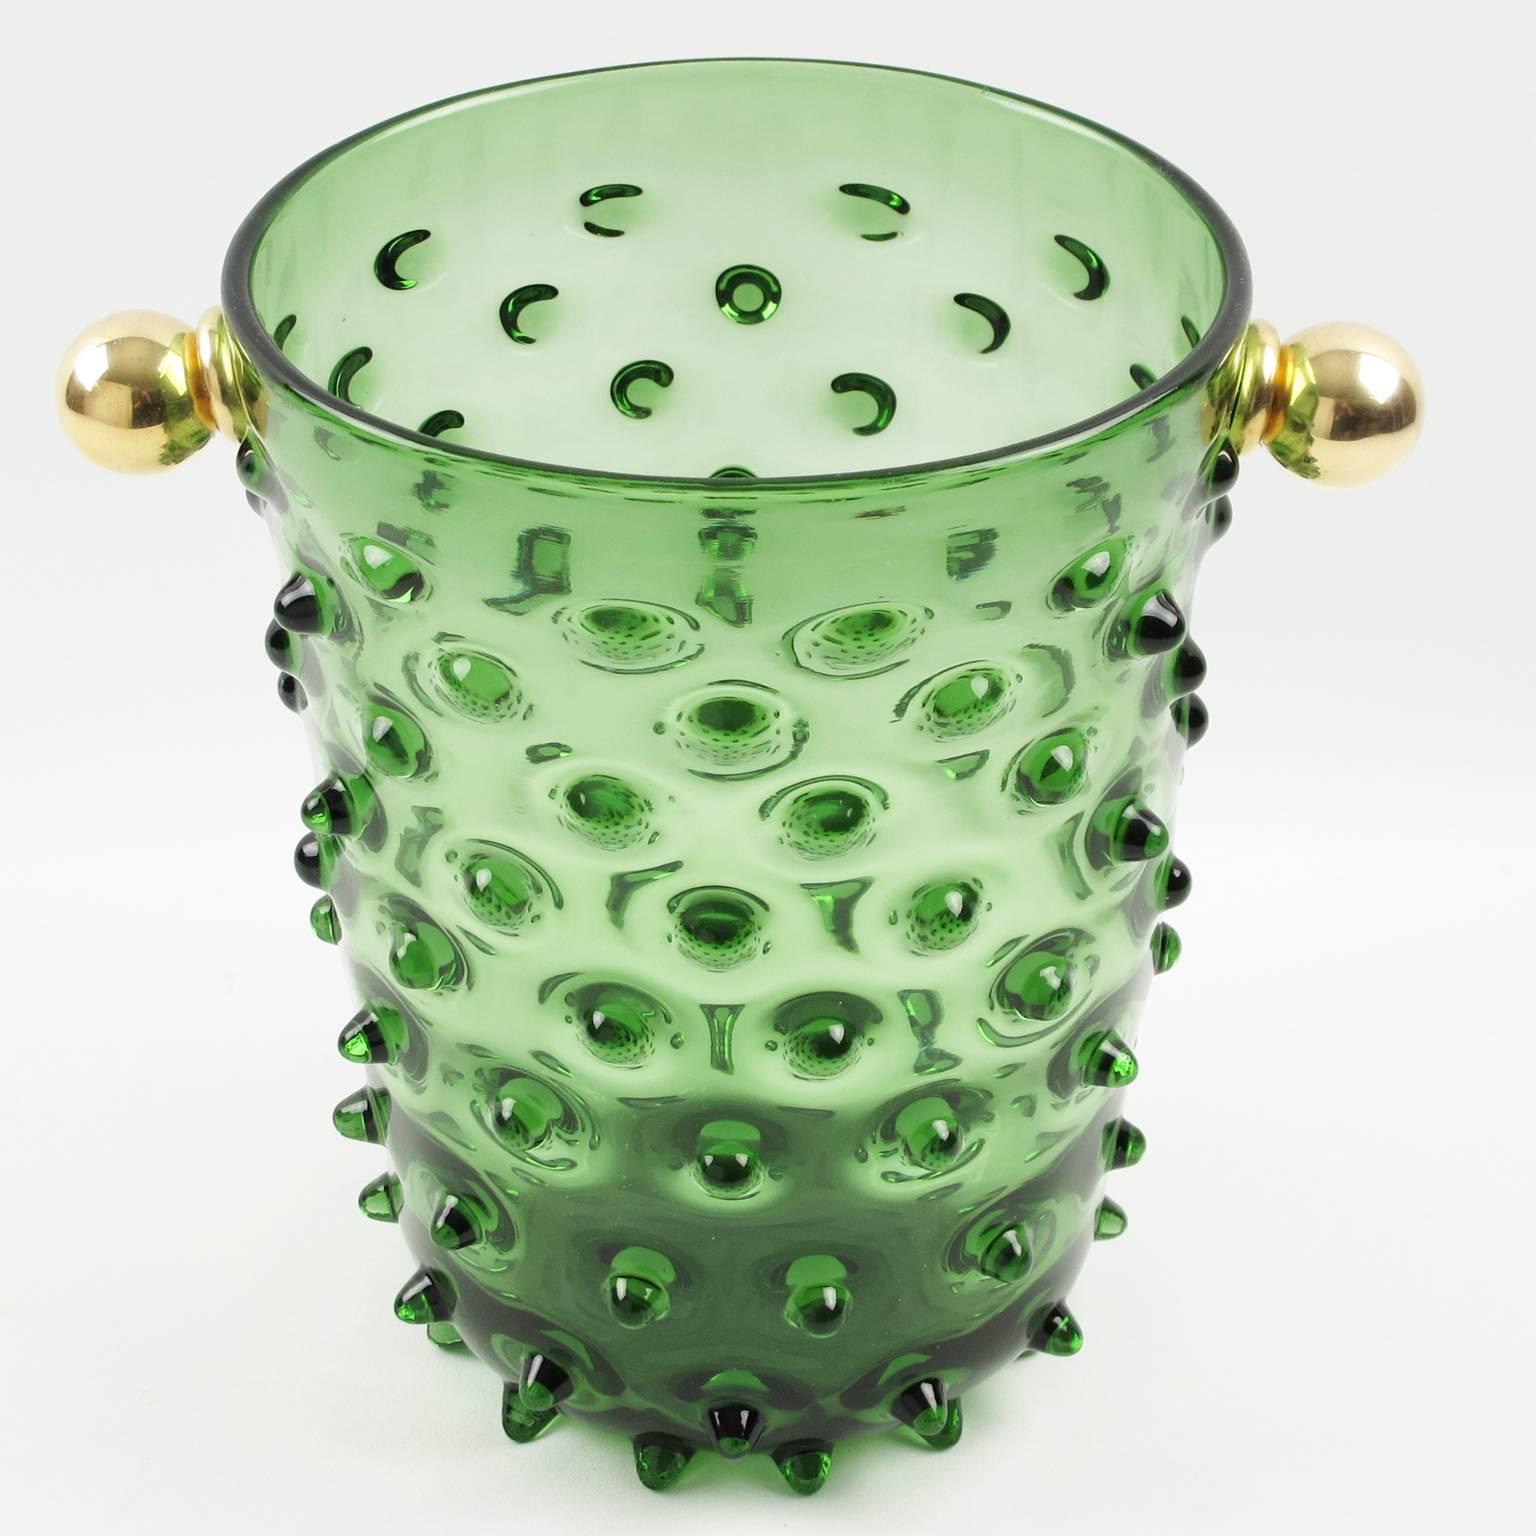 Vintage green glass champagne or wine cooler, ice bucket, mouth-blown in Empoli, Italy, circa 1960s. Exclusive hobnail flowing pattern with solid brass bead handles. Polished pontil mark on the bottom. Excellent condition.

Measurements: 9.44 in.